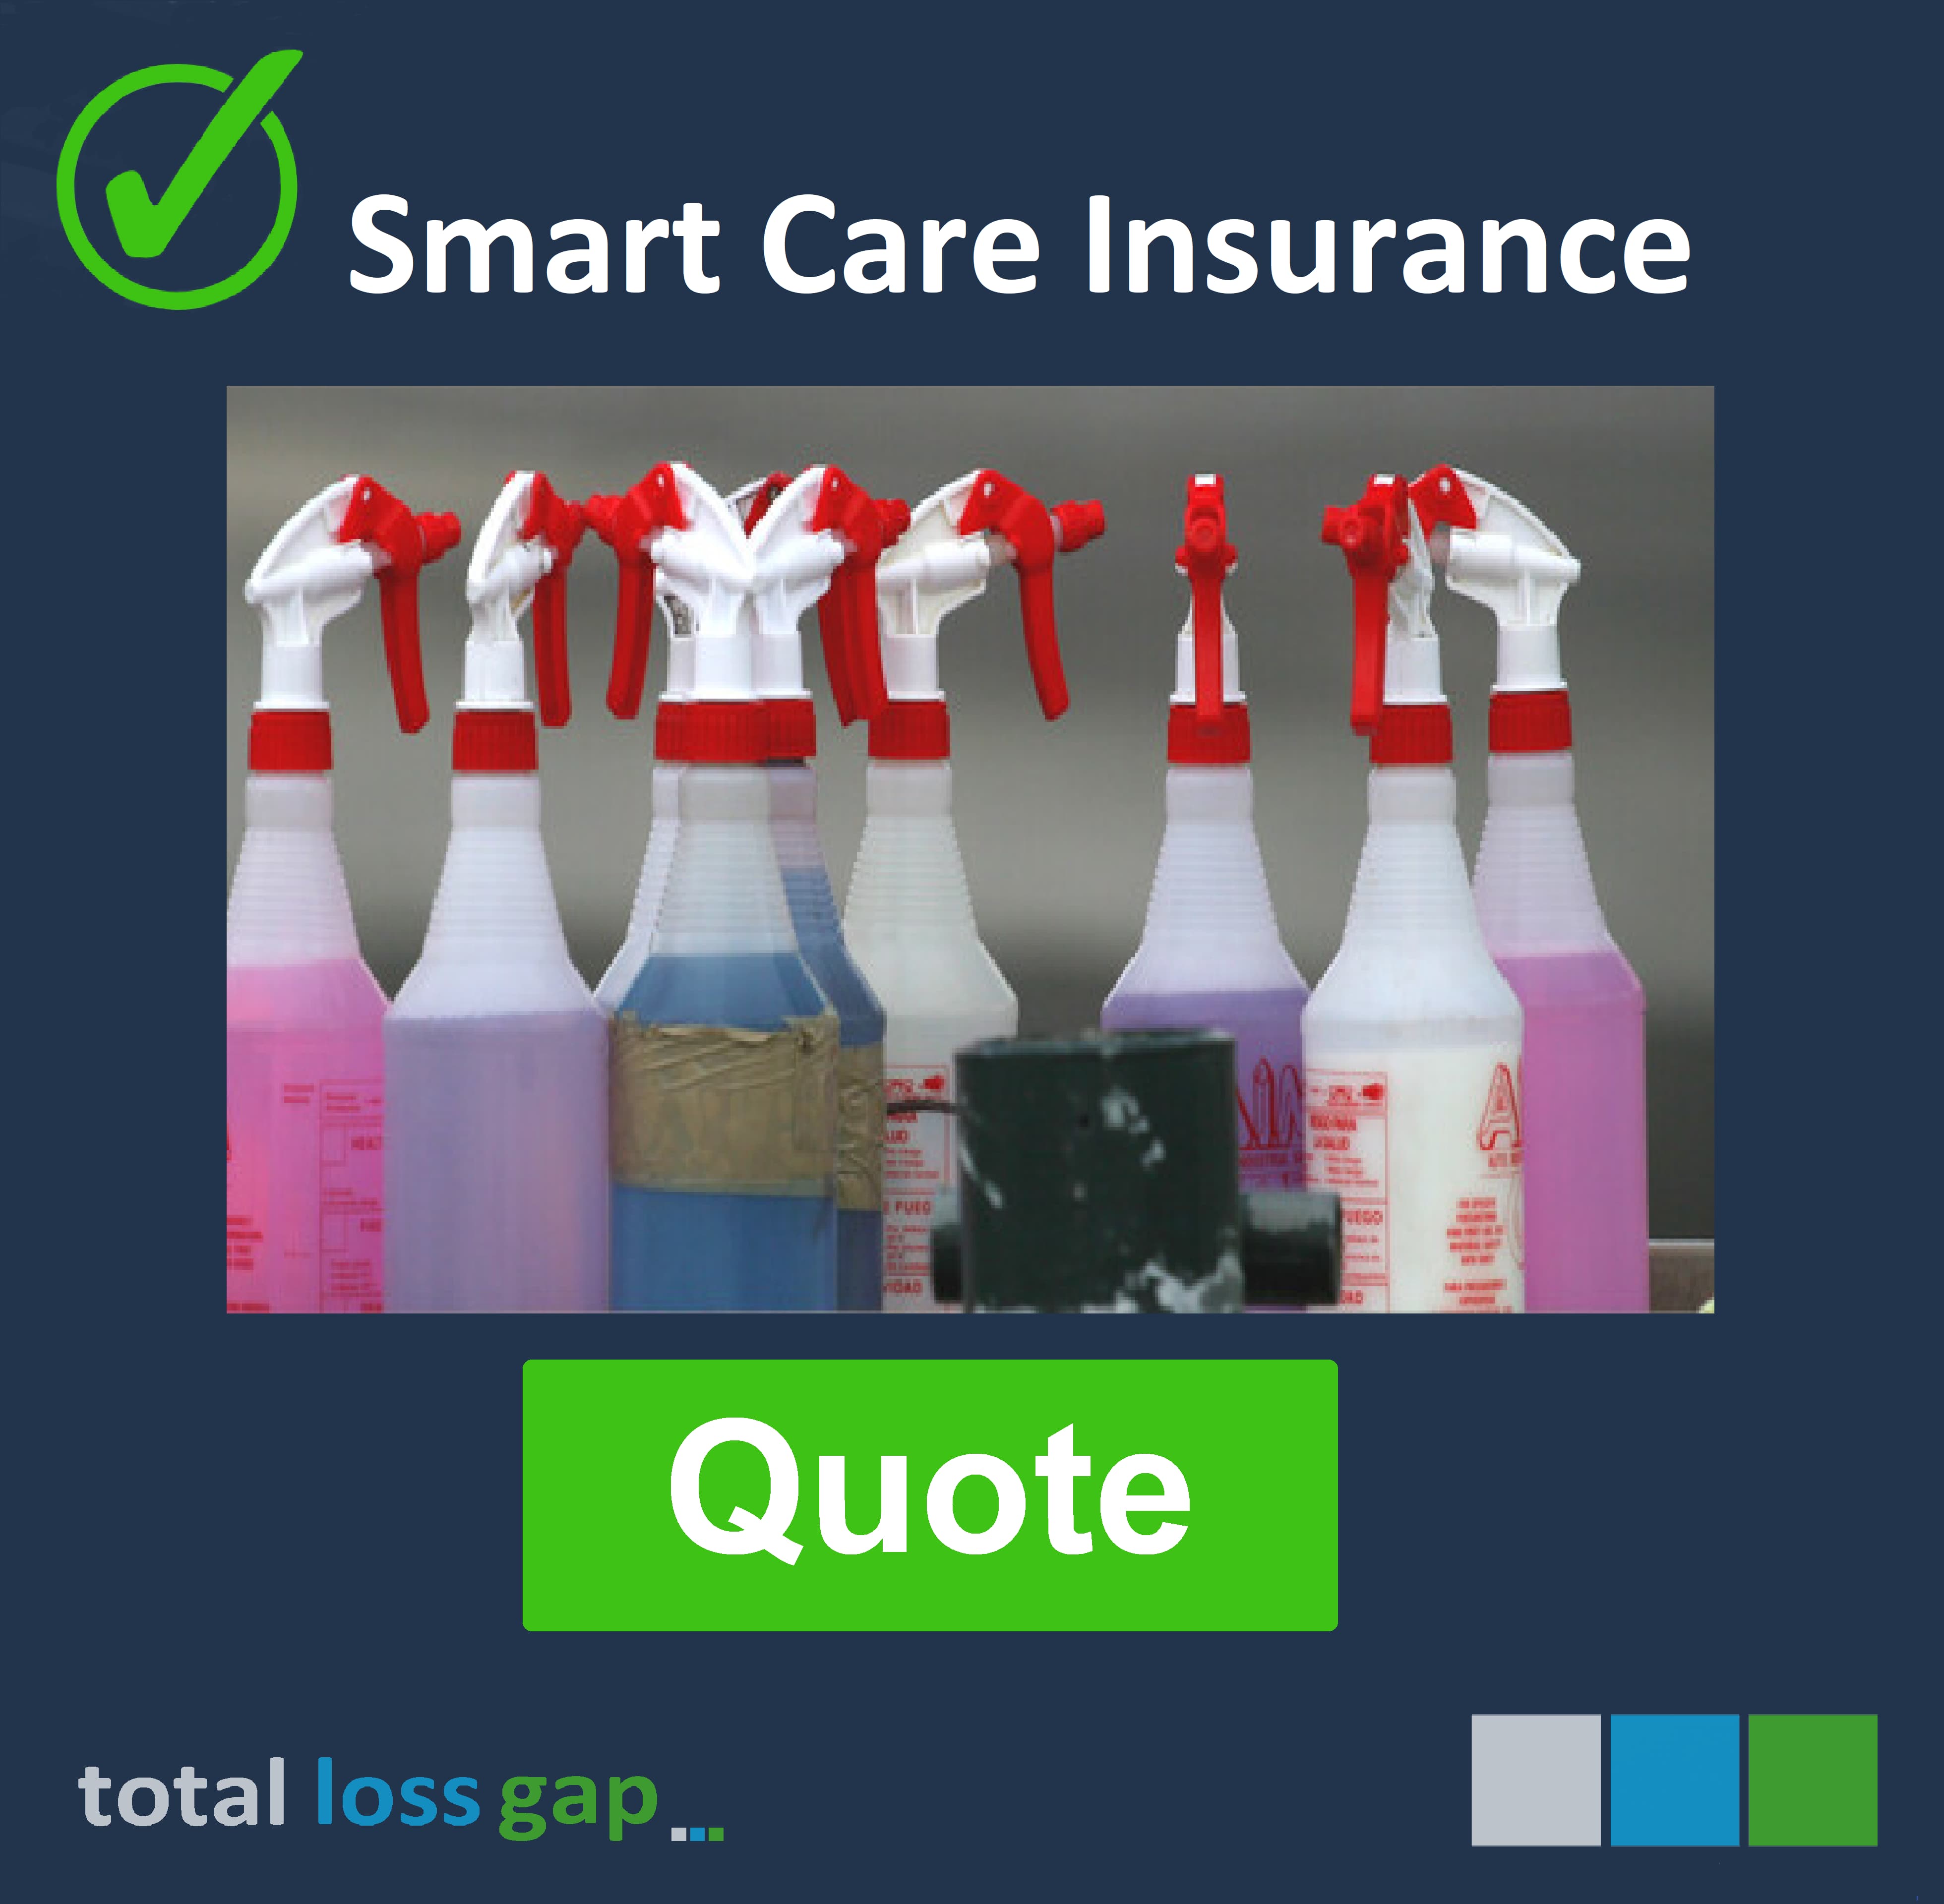 Smart Care Insurance for your electric car